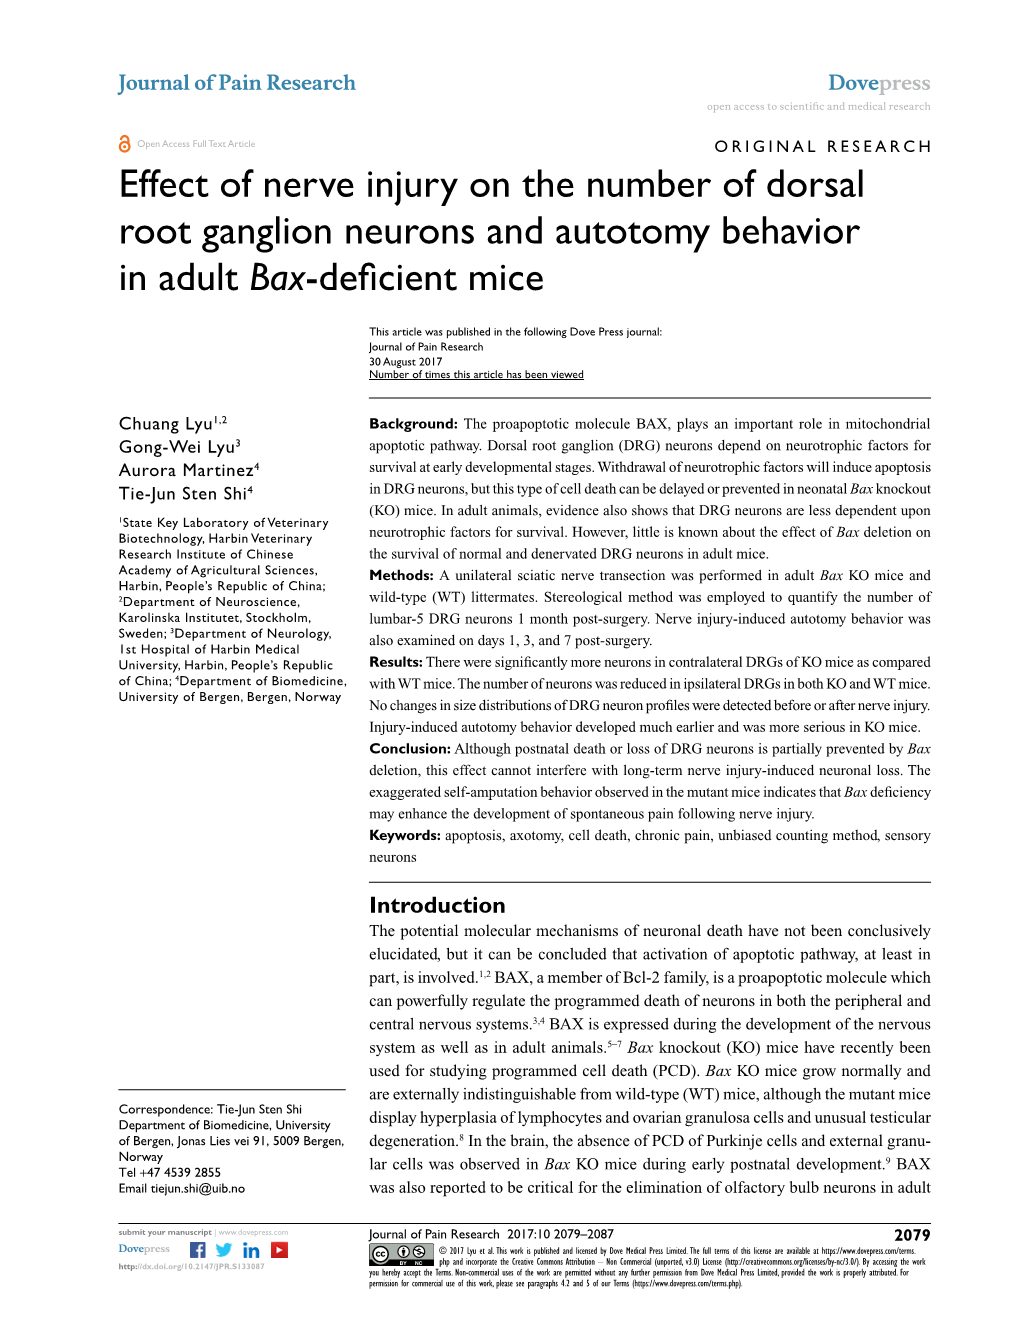 Effect of Nerve Injury on the Number of Dorsal Root Ganglion Neurons and Autotomy Behavior in Adult Bax-Deficient Mice